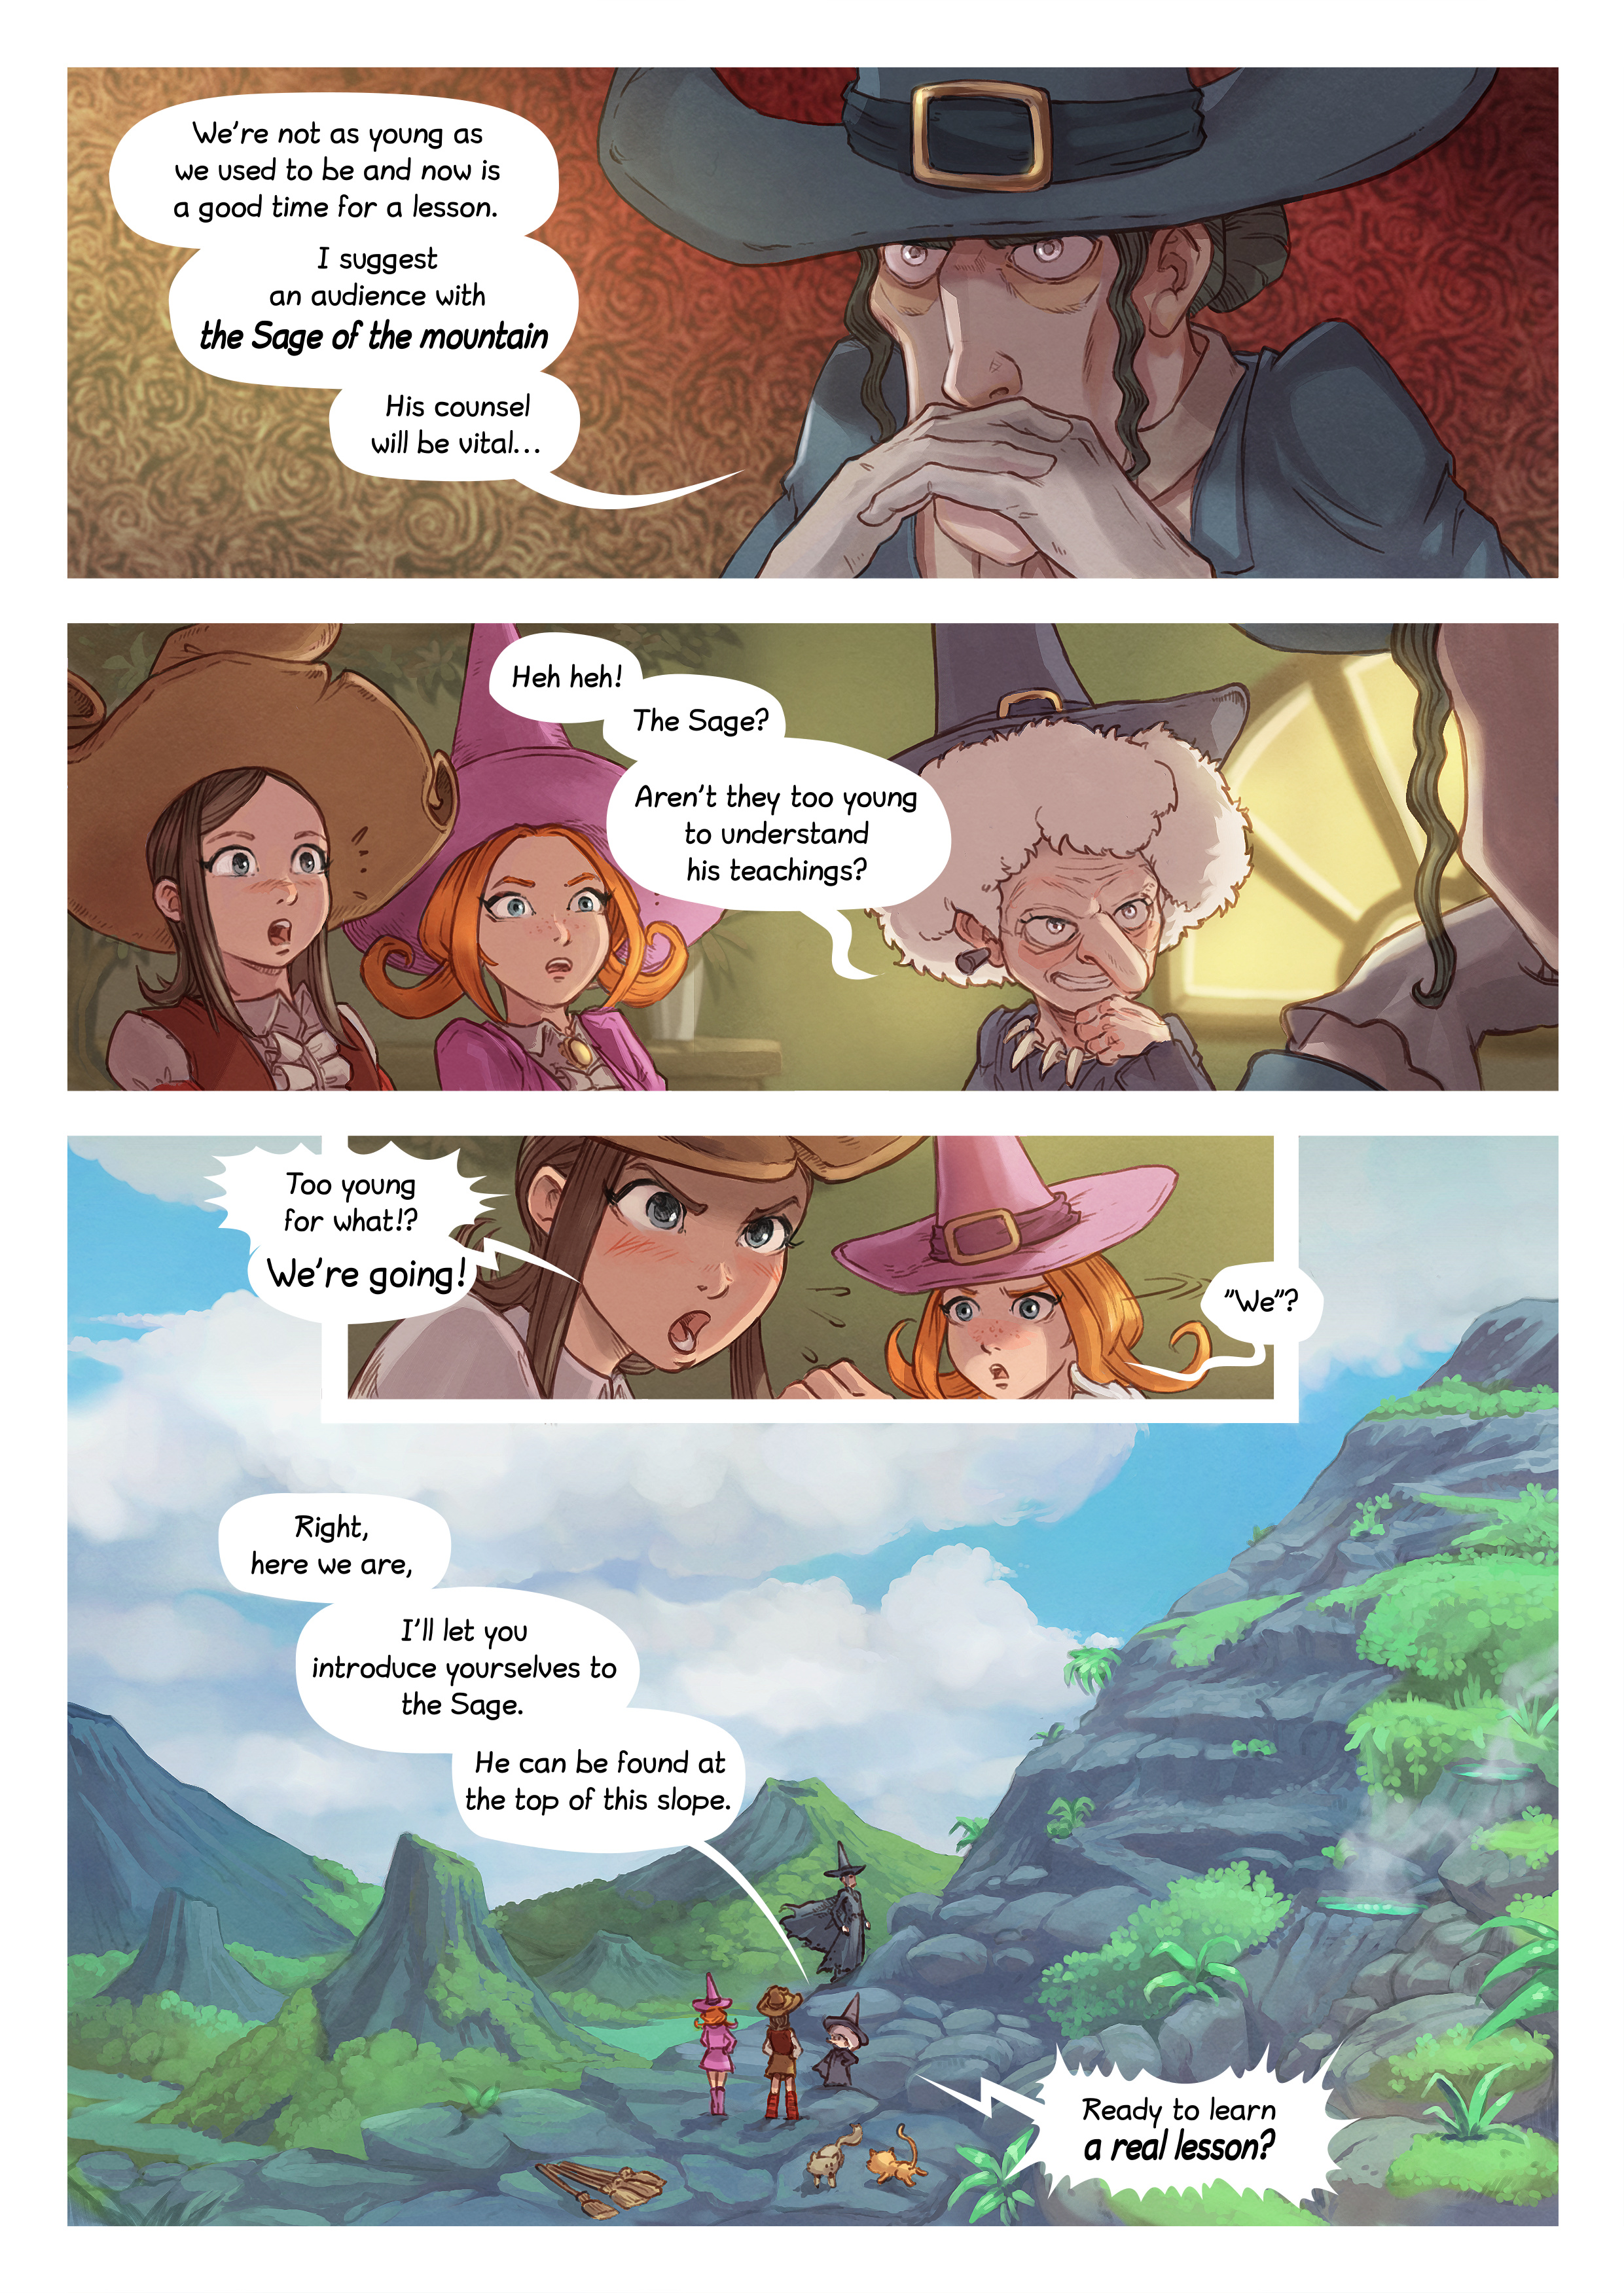 Episode 16: The Sage of the Mountain, Page 4